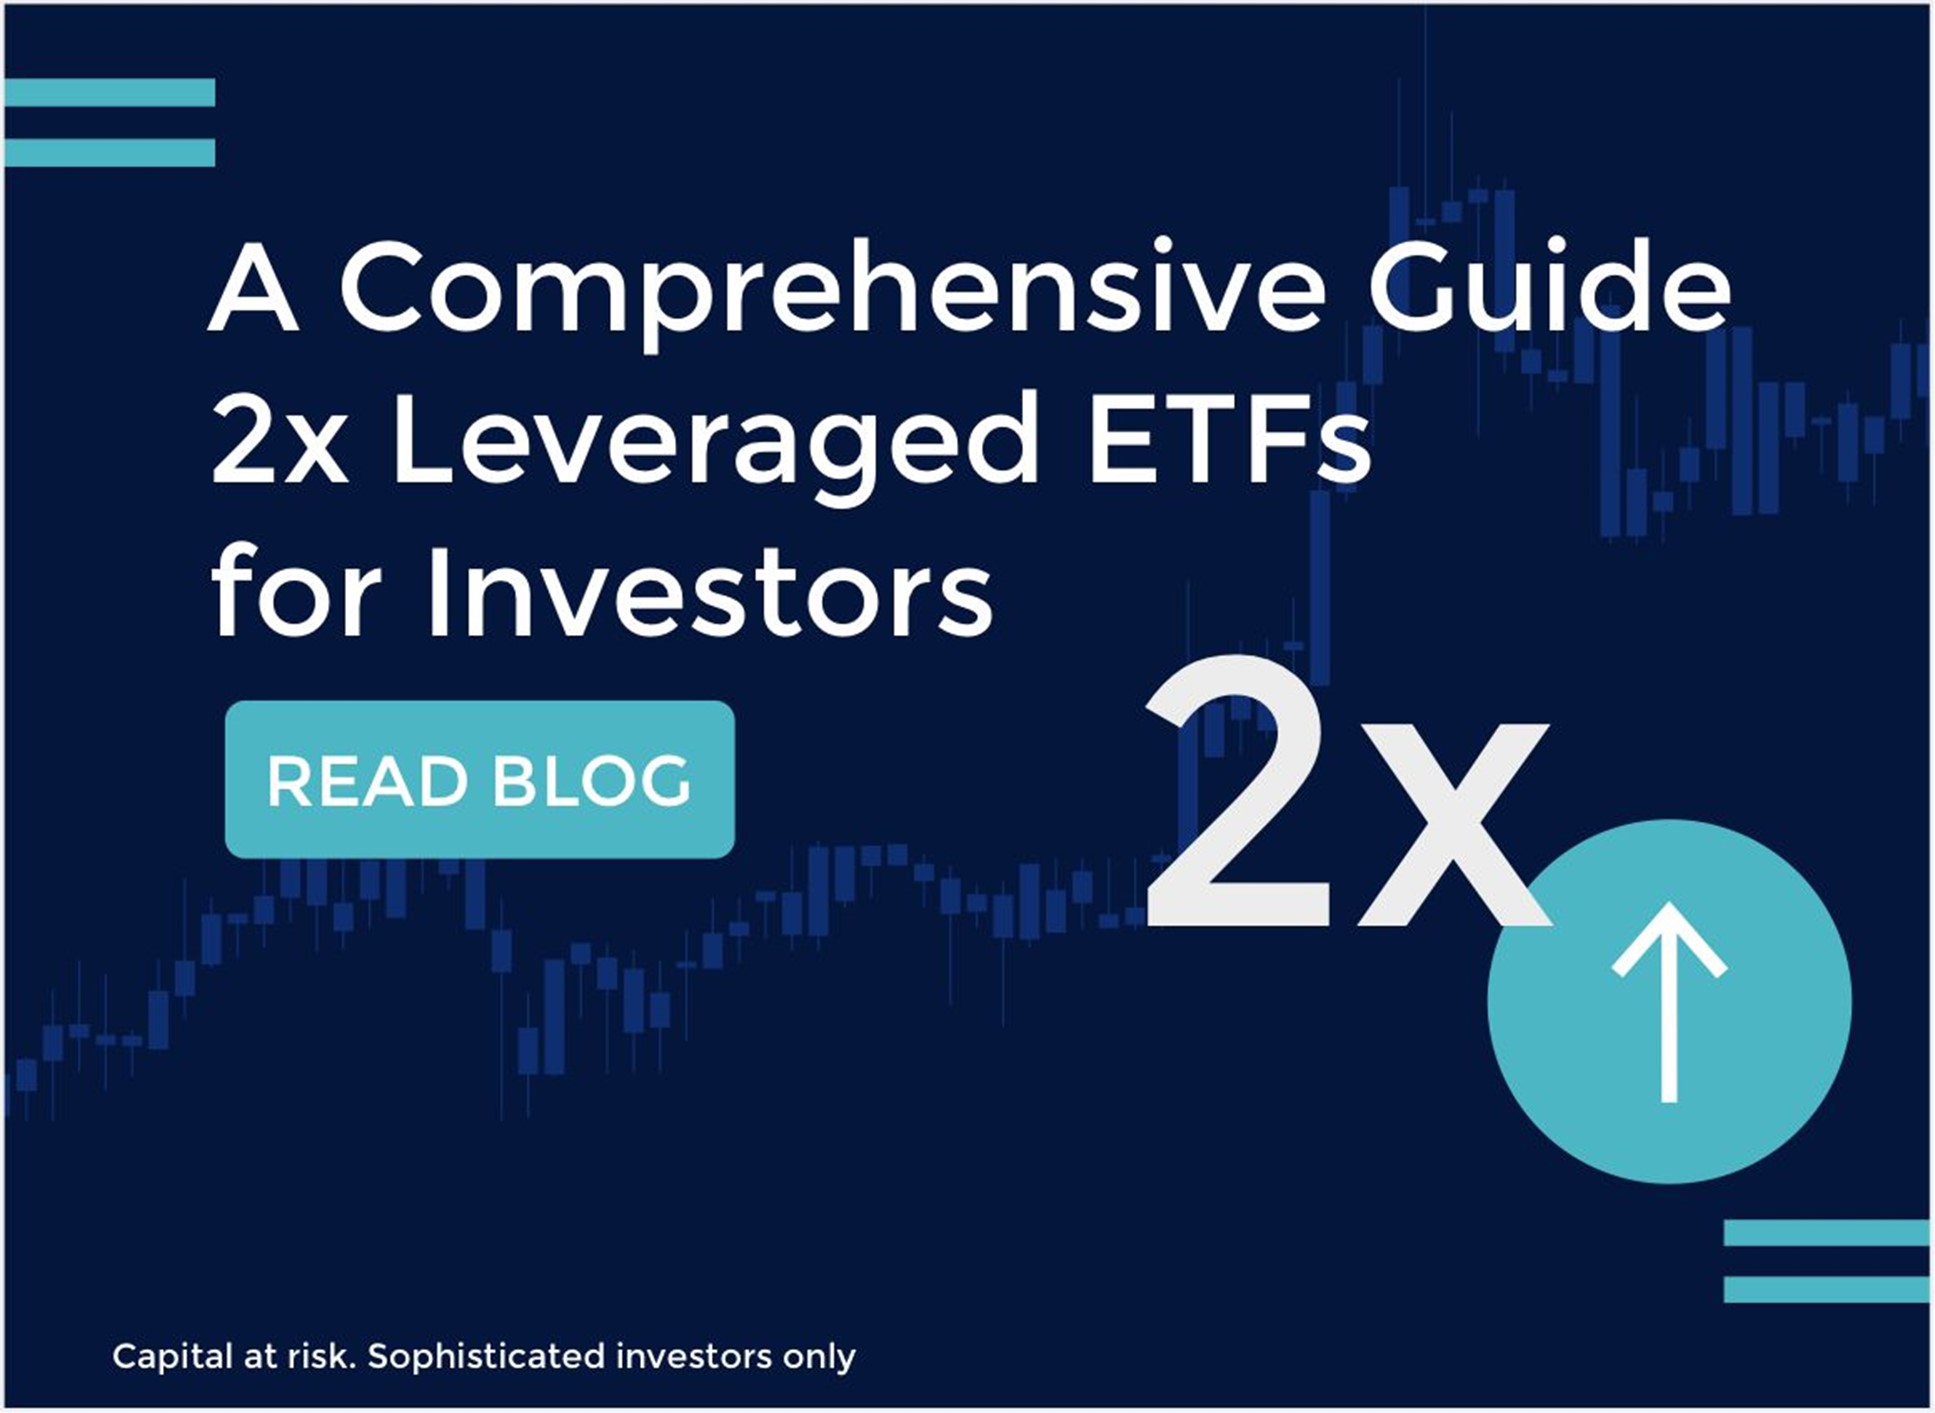 A Comprehensive Guide to 2x Leveraged ETFs for Investors